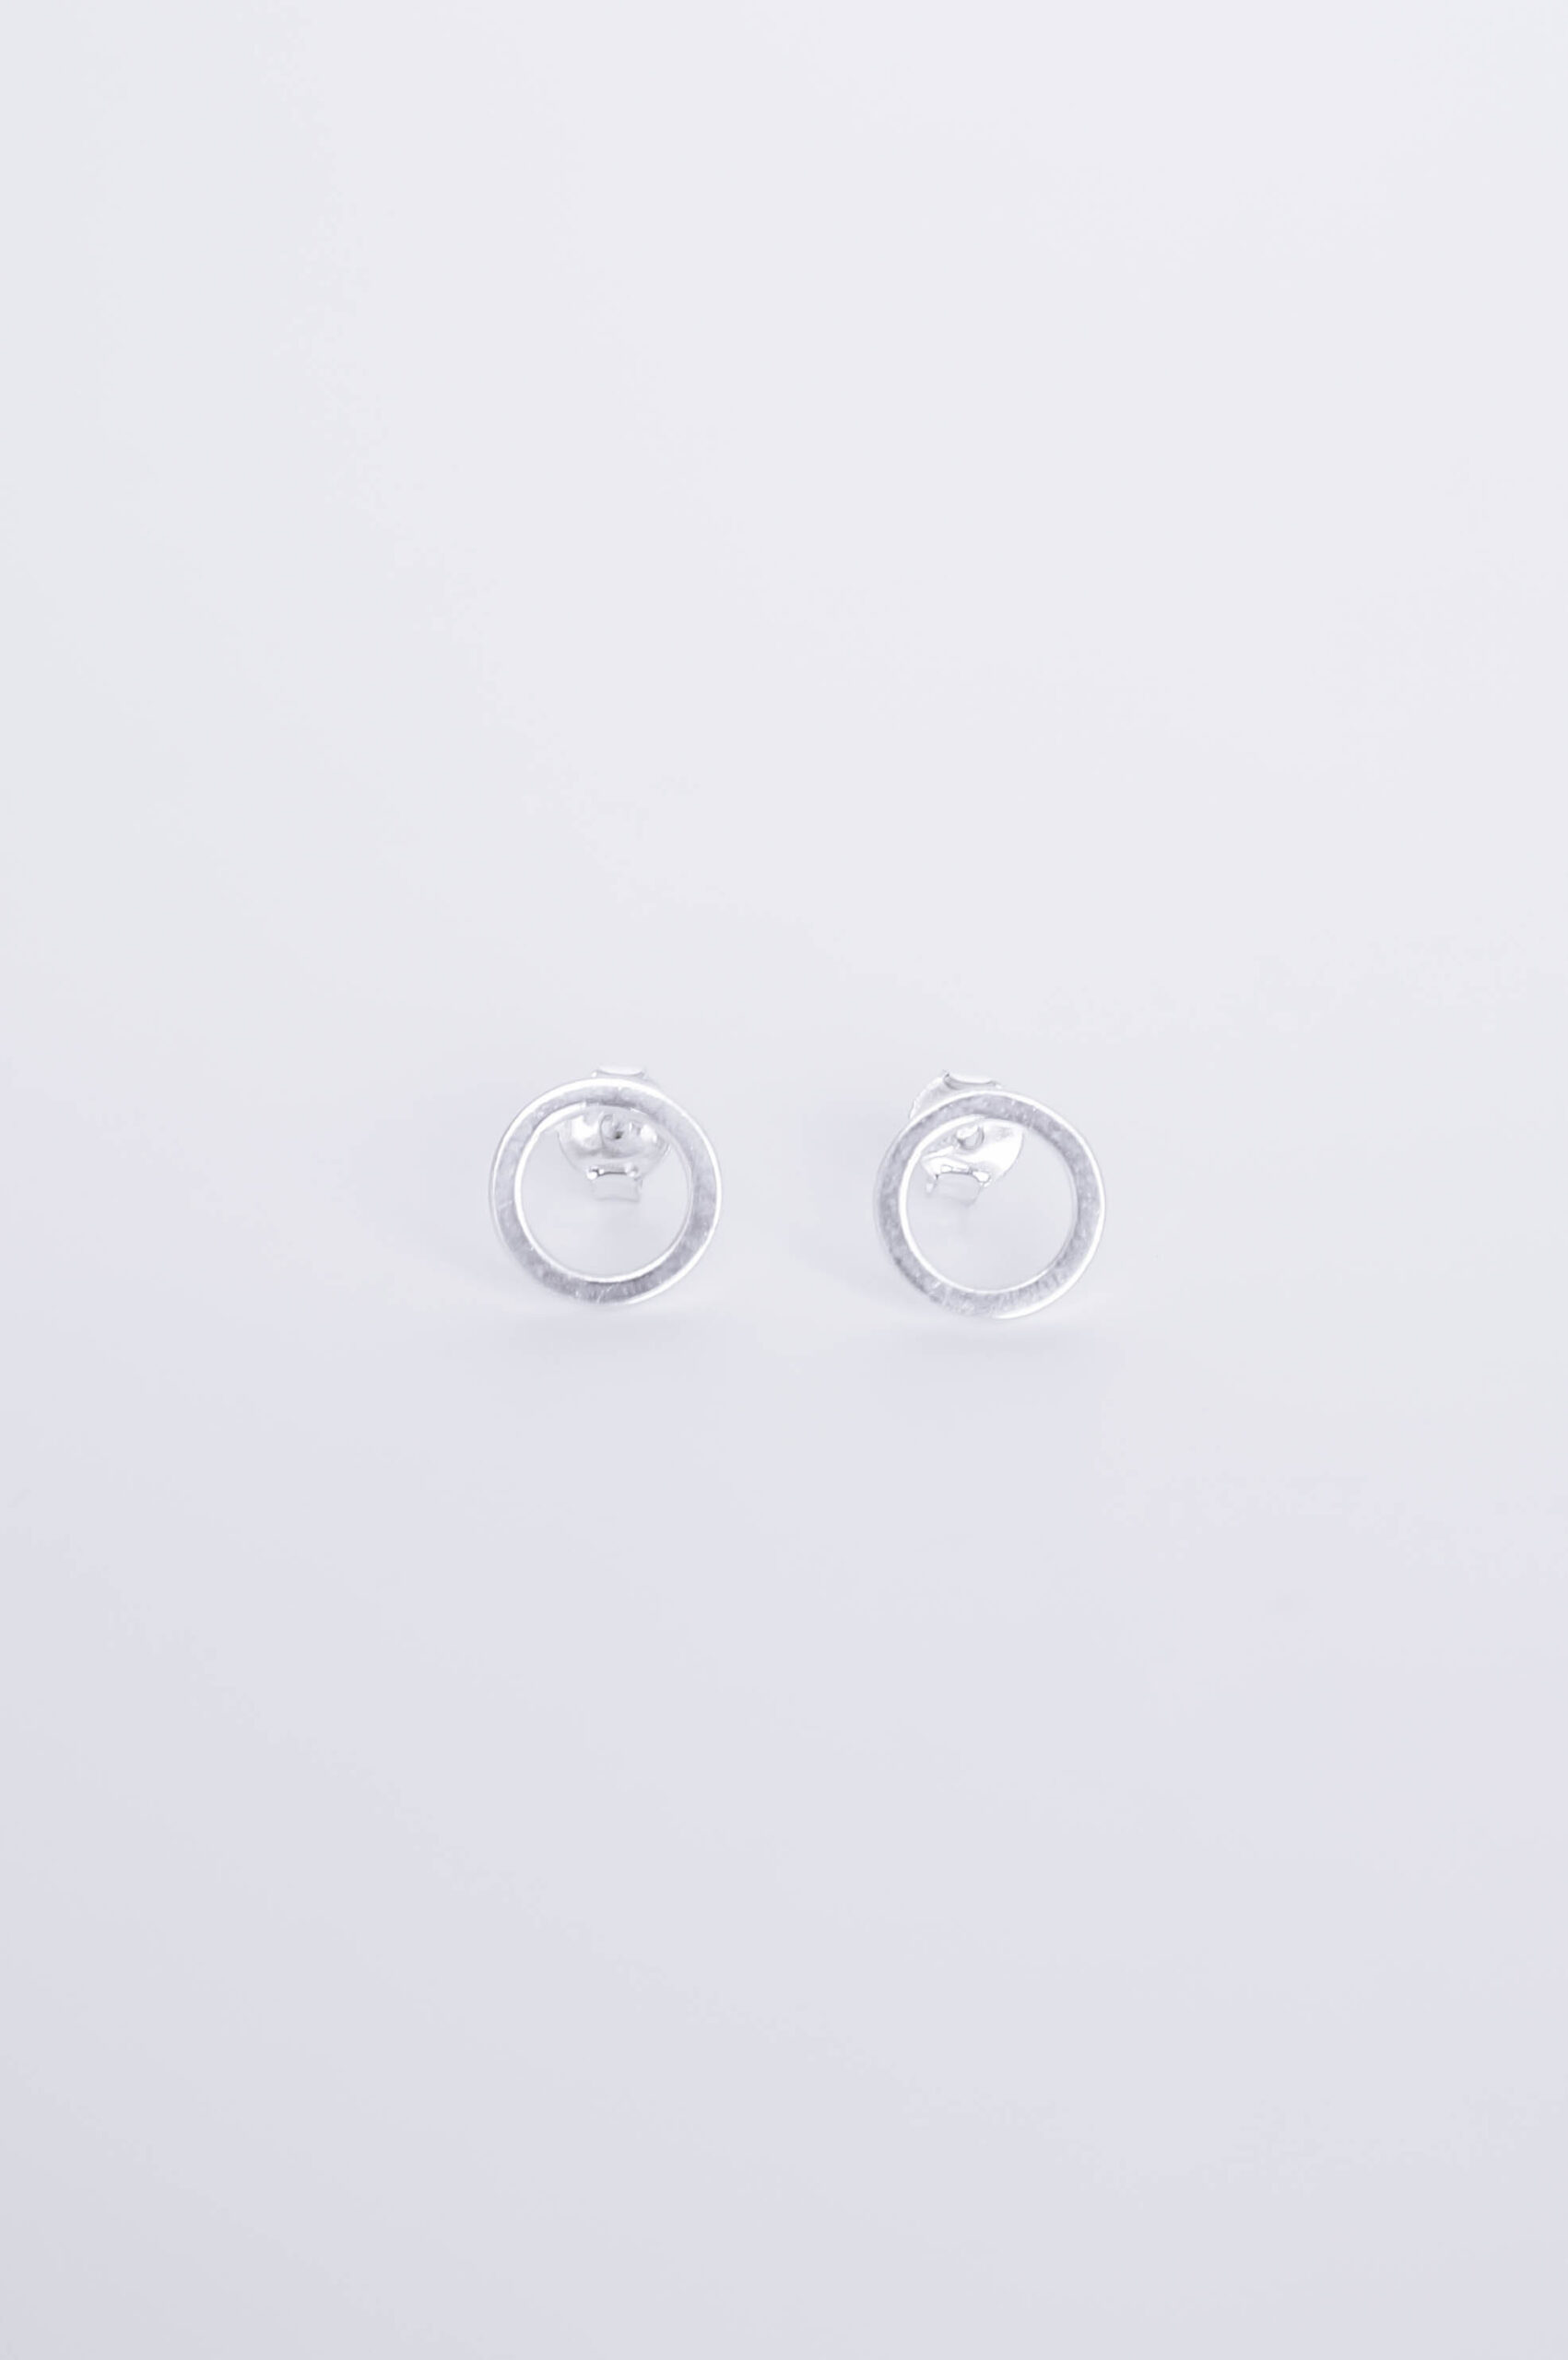 Minimal silver circle earrings - GG Unique